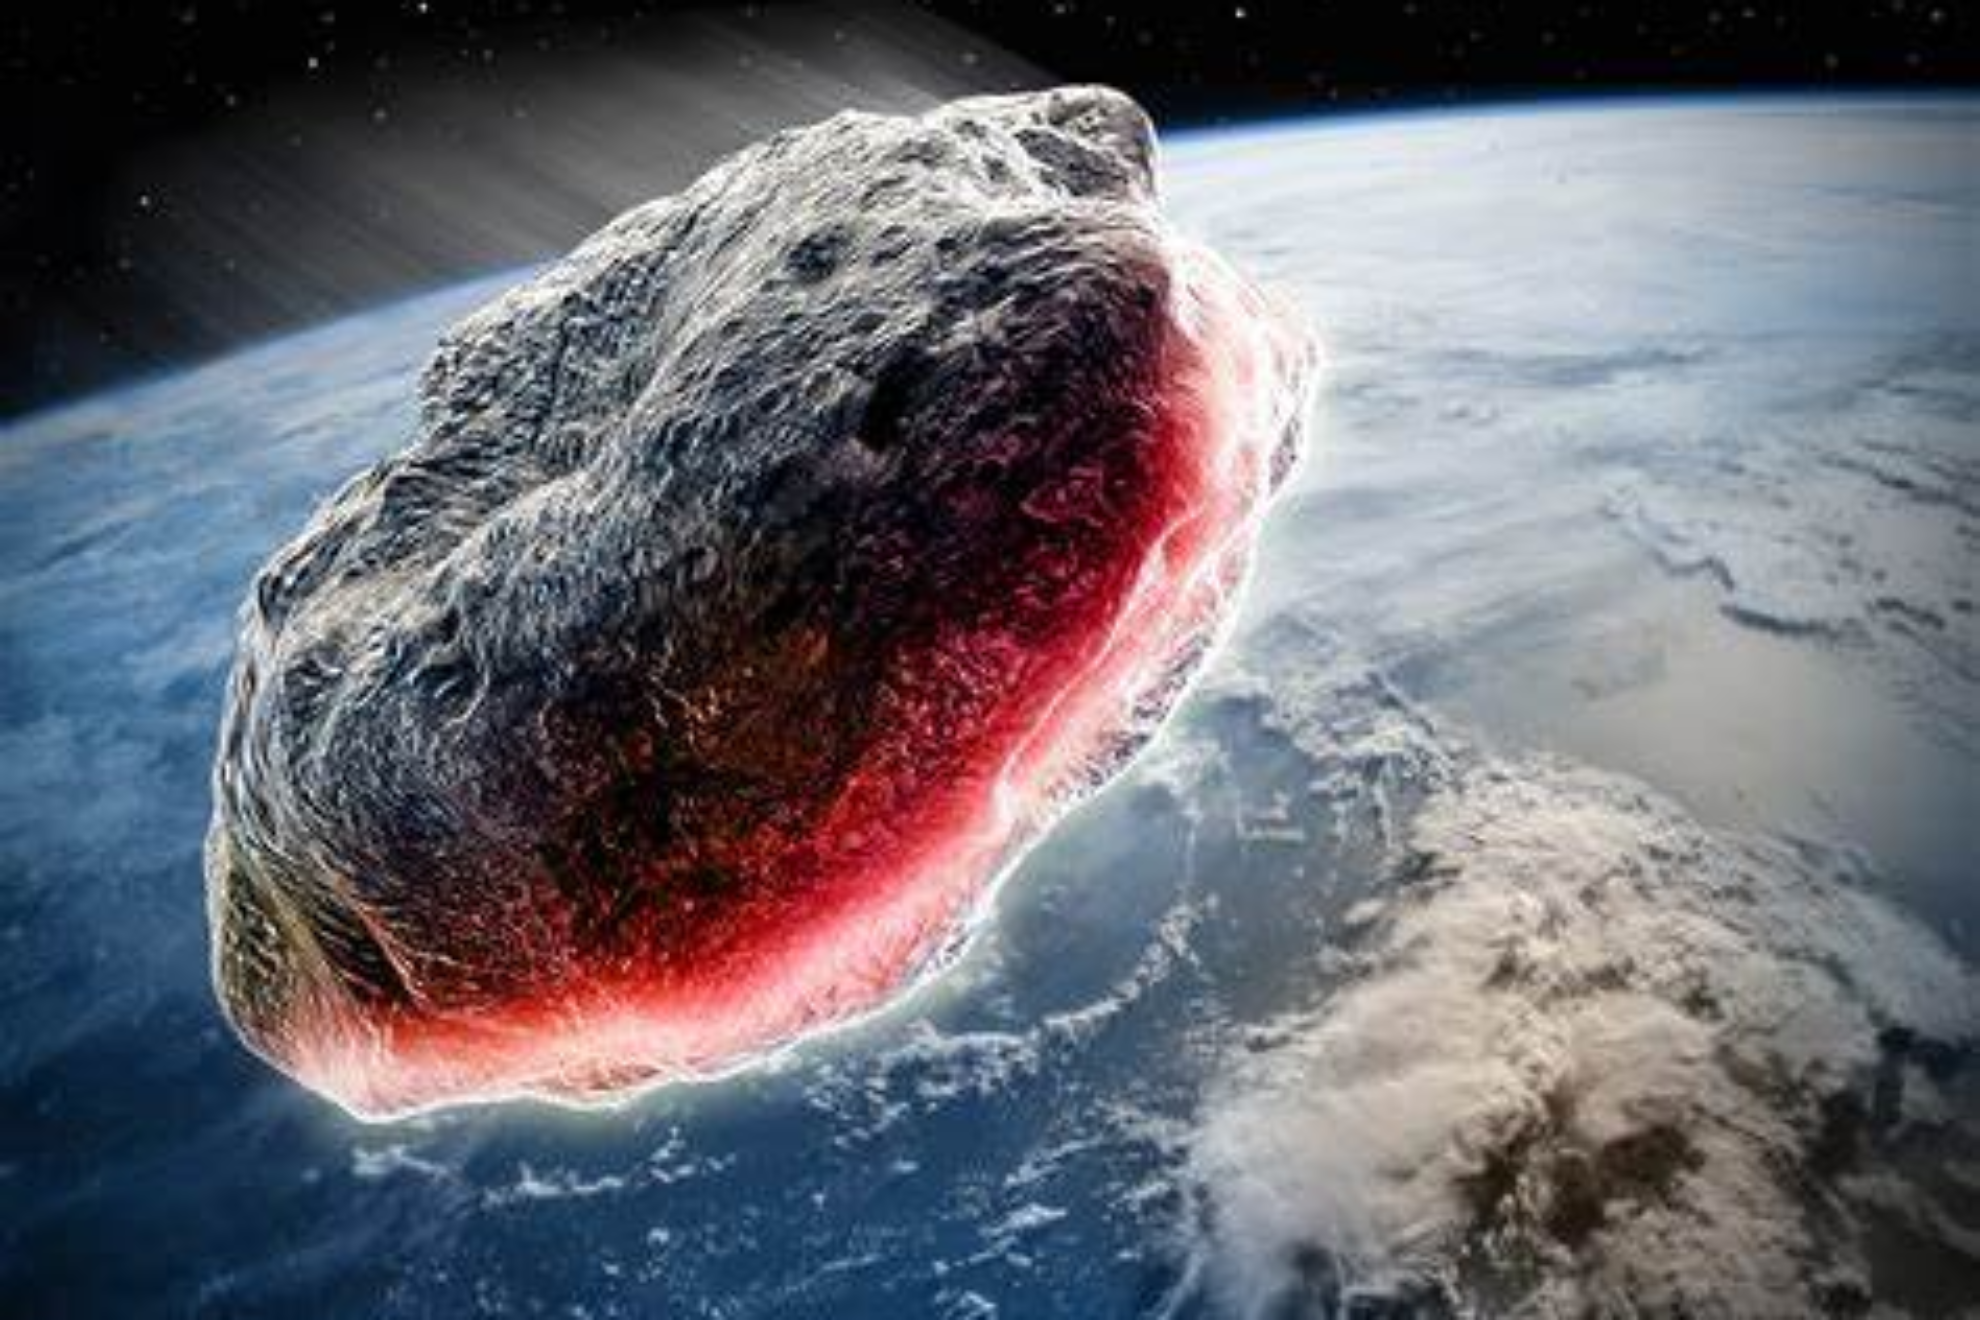 Asteroid the size of skyscraper heading towards Earth warns NASA... Could it cause the apocalypse?